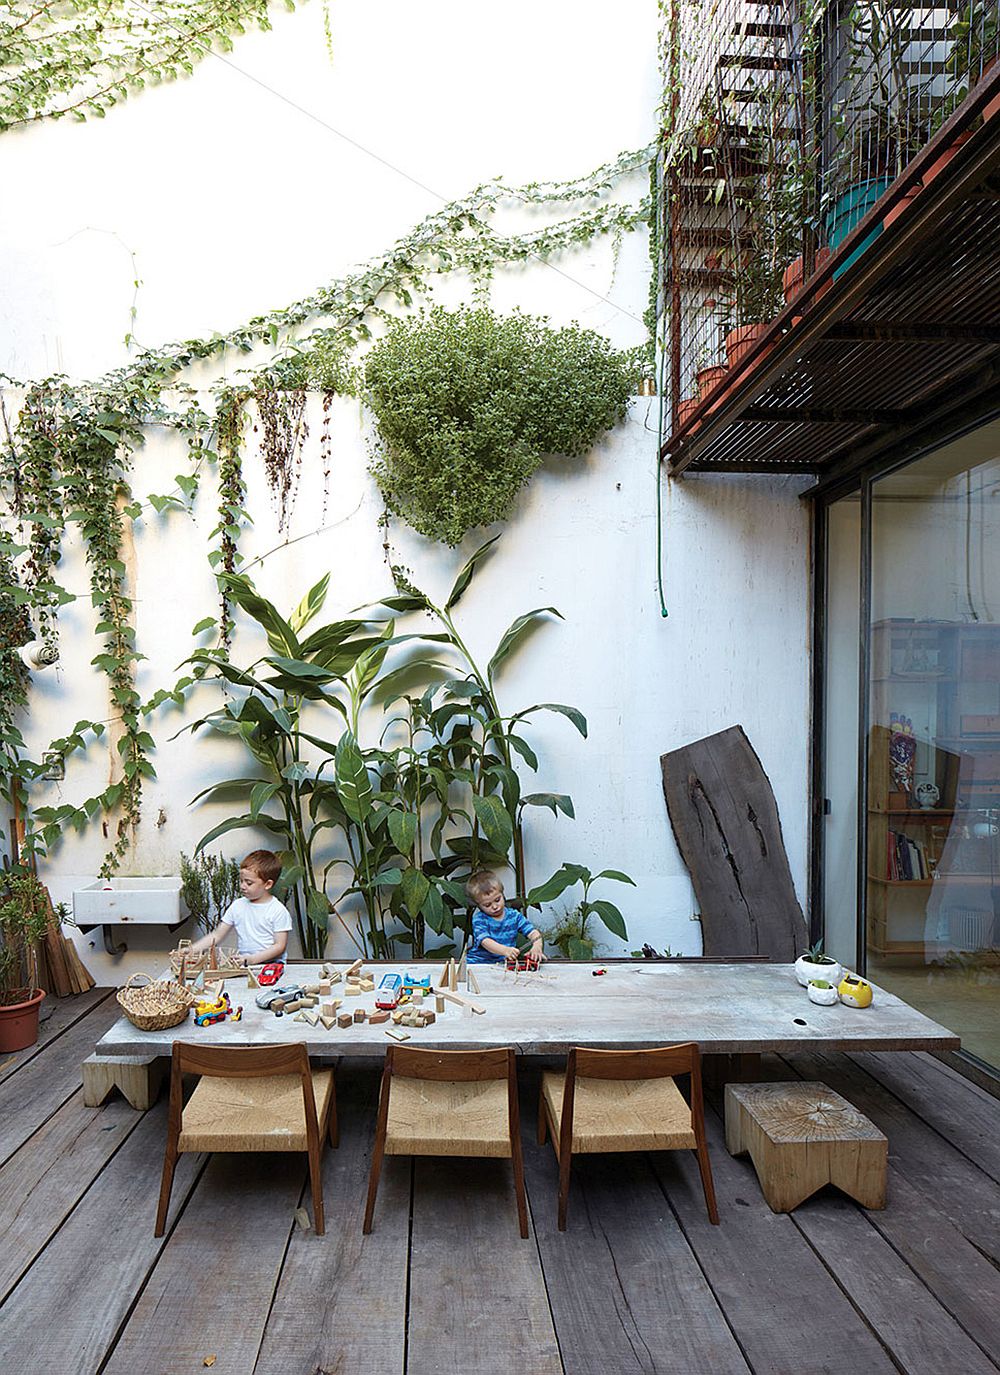 Outdoor-dining-area-surrounded-by-greenery